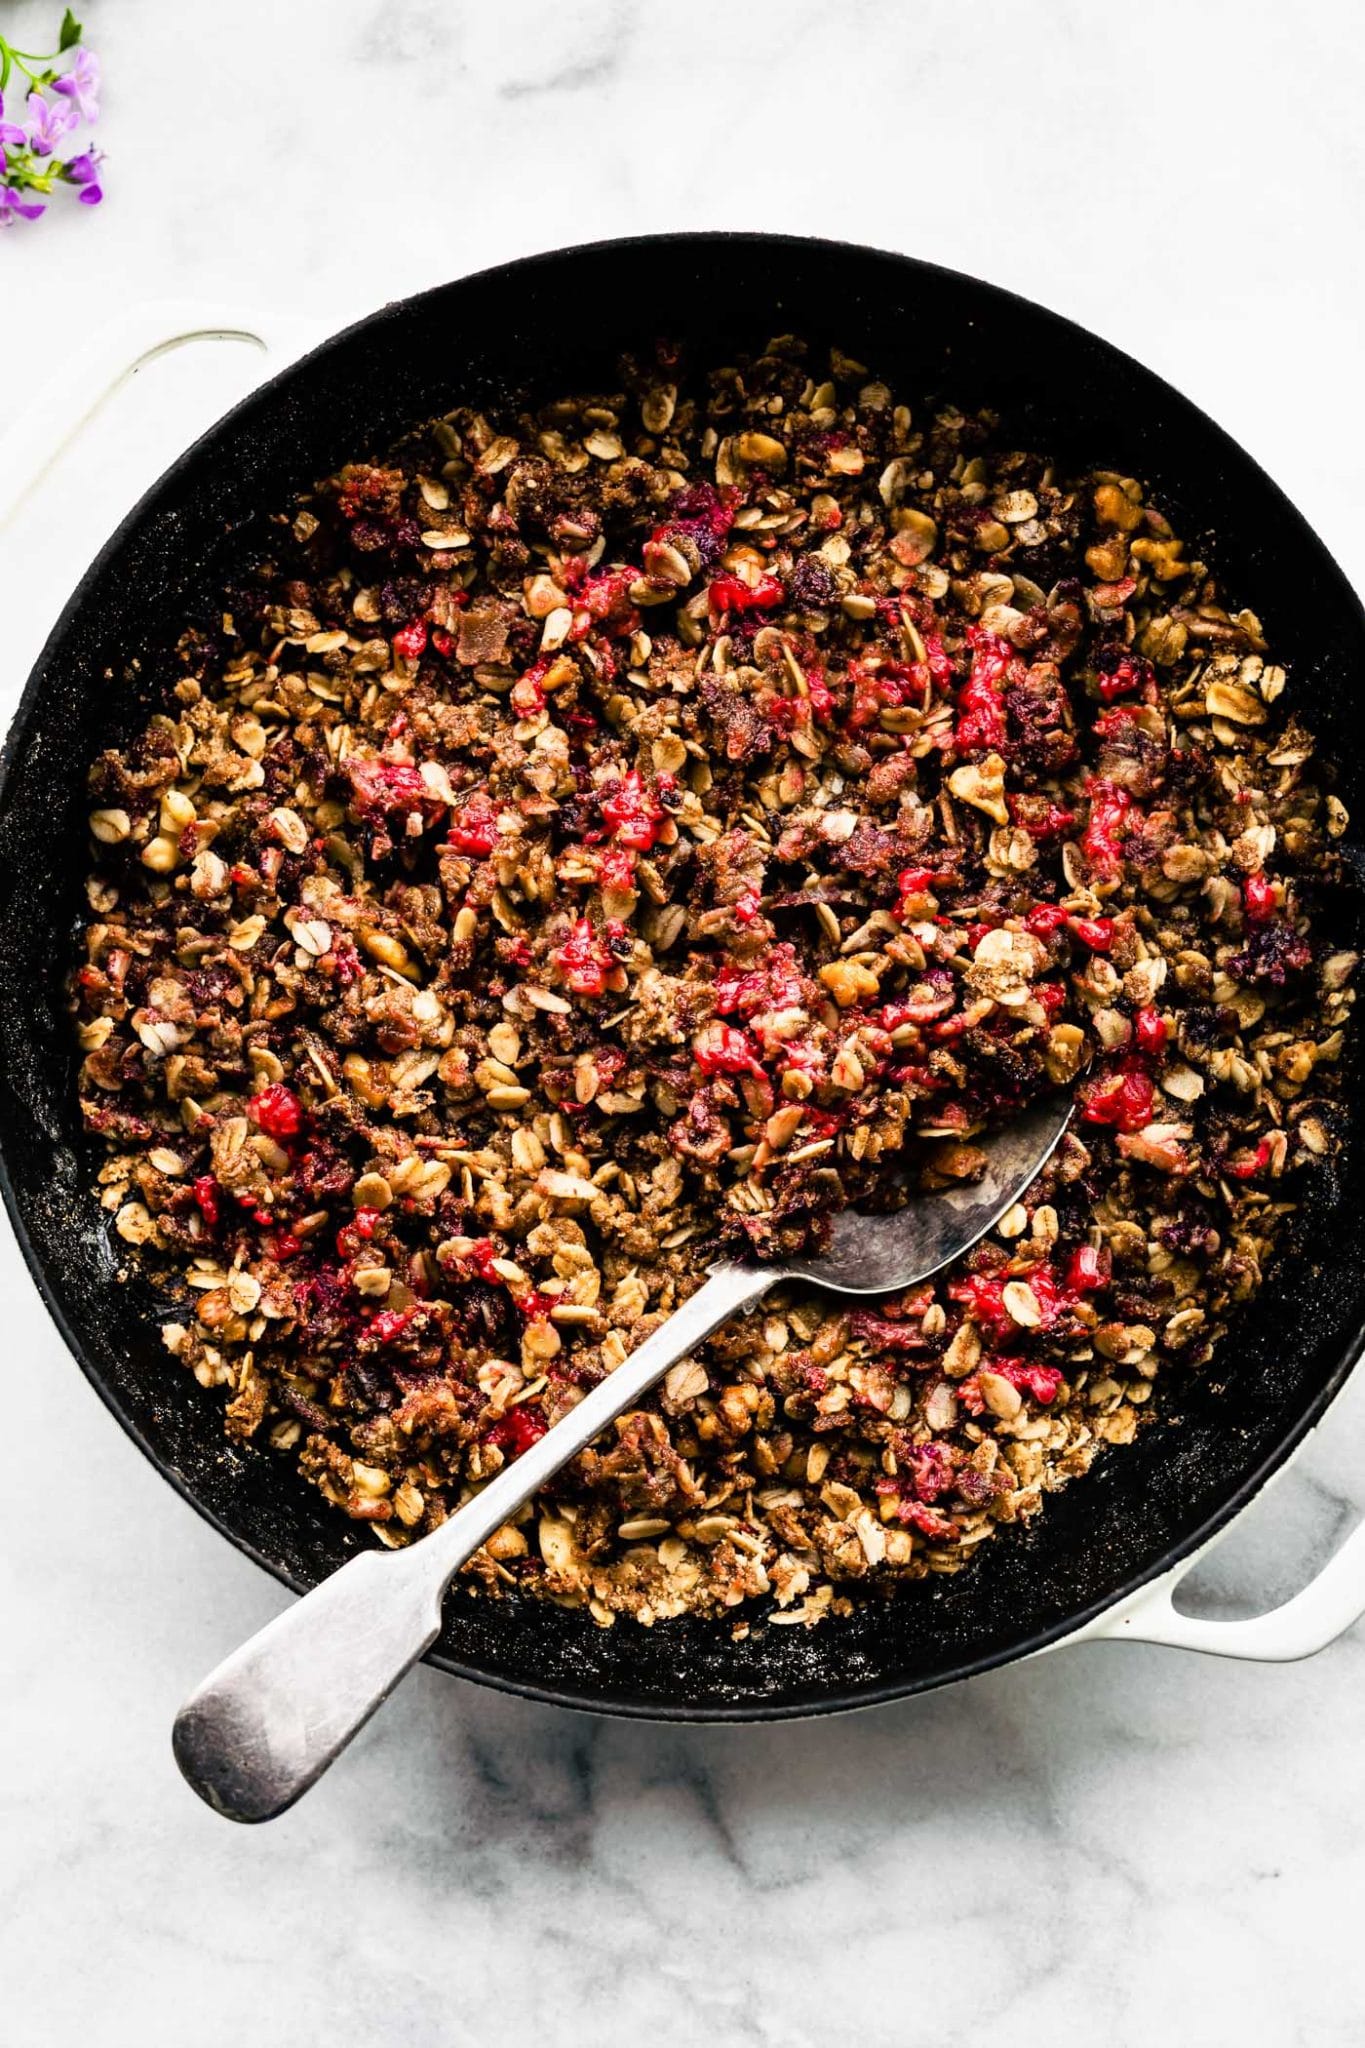 Overhead view vegan berry rhubarb crumble in skillet with large serving spoon in crumble.